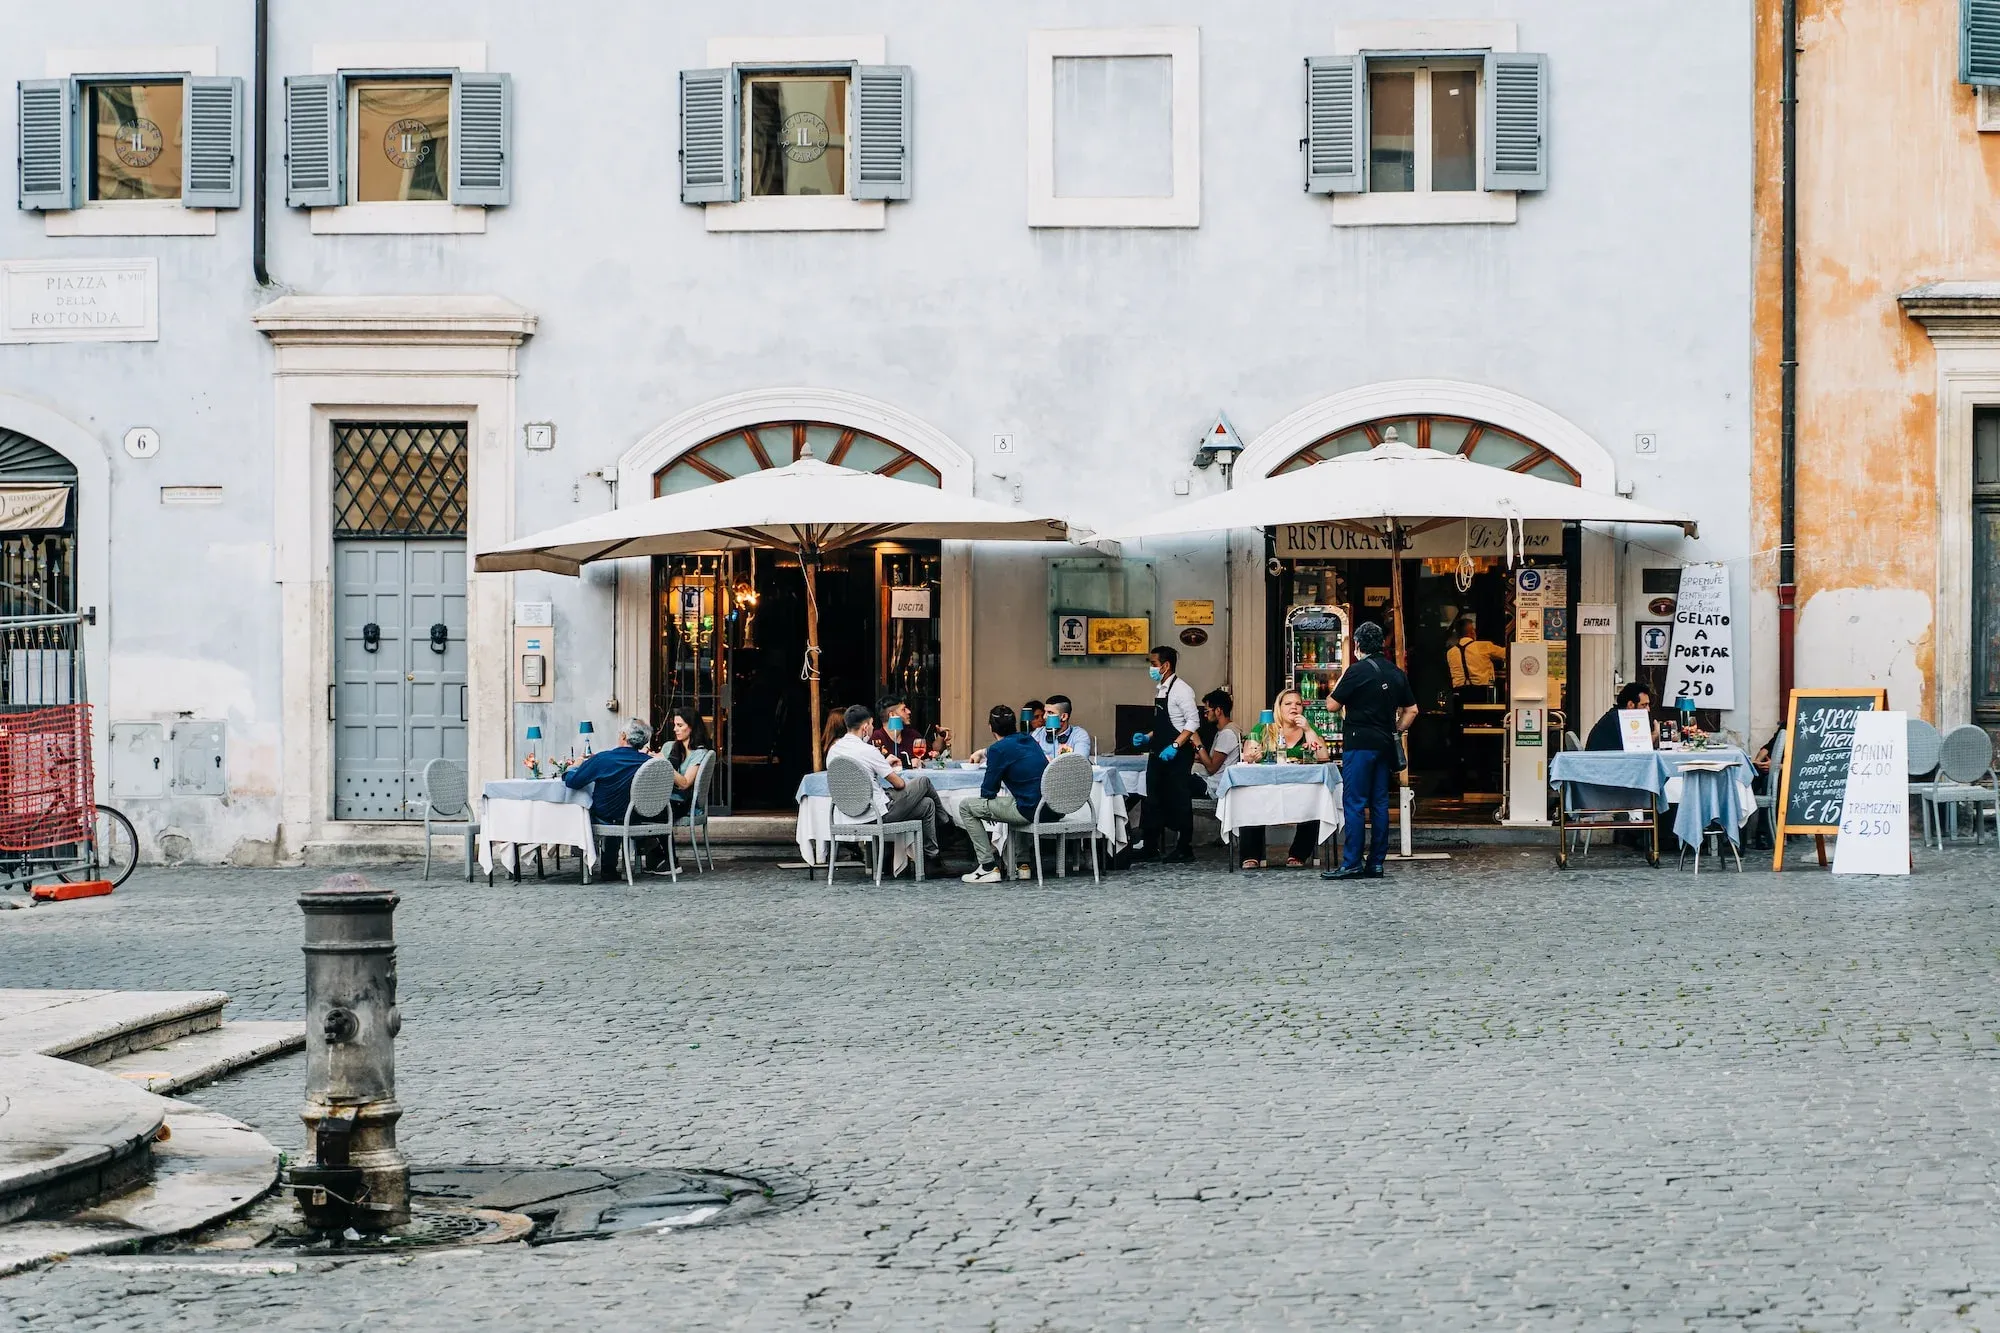 Image of an Italian restaurant in Rome, Italy